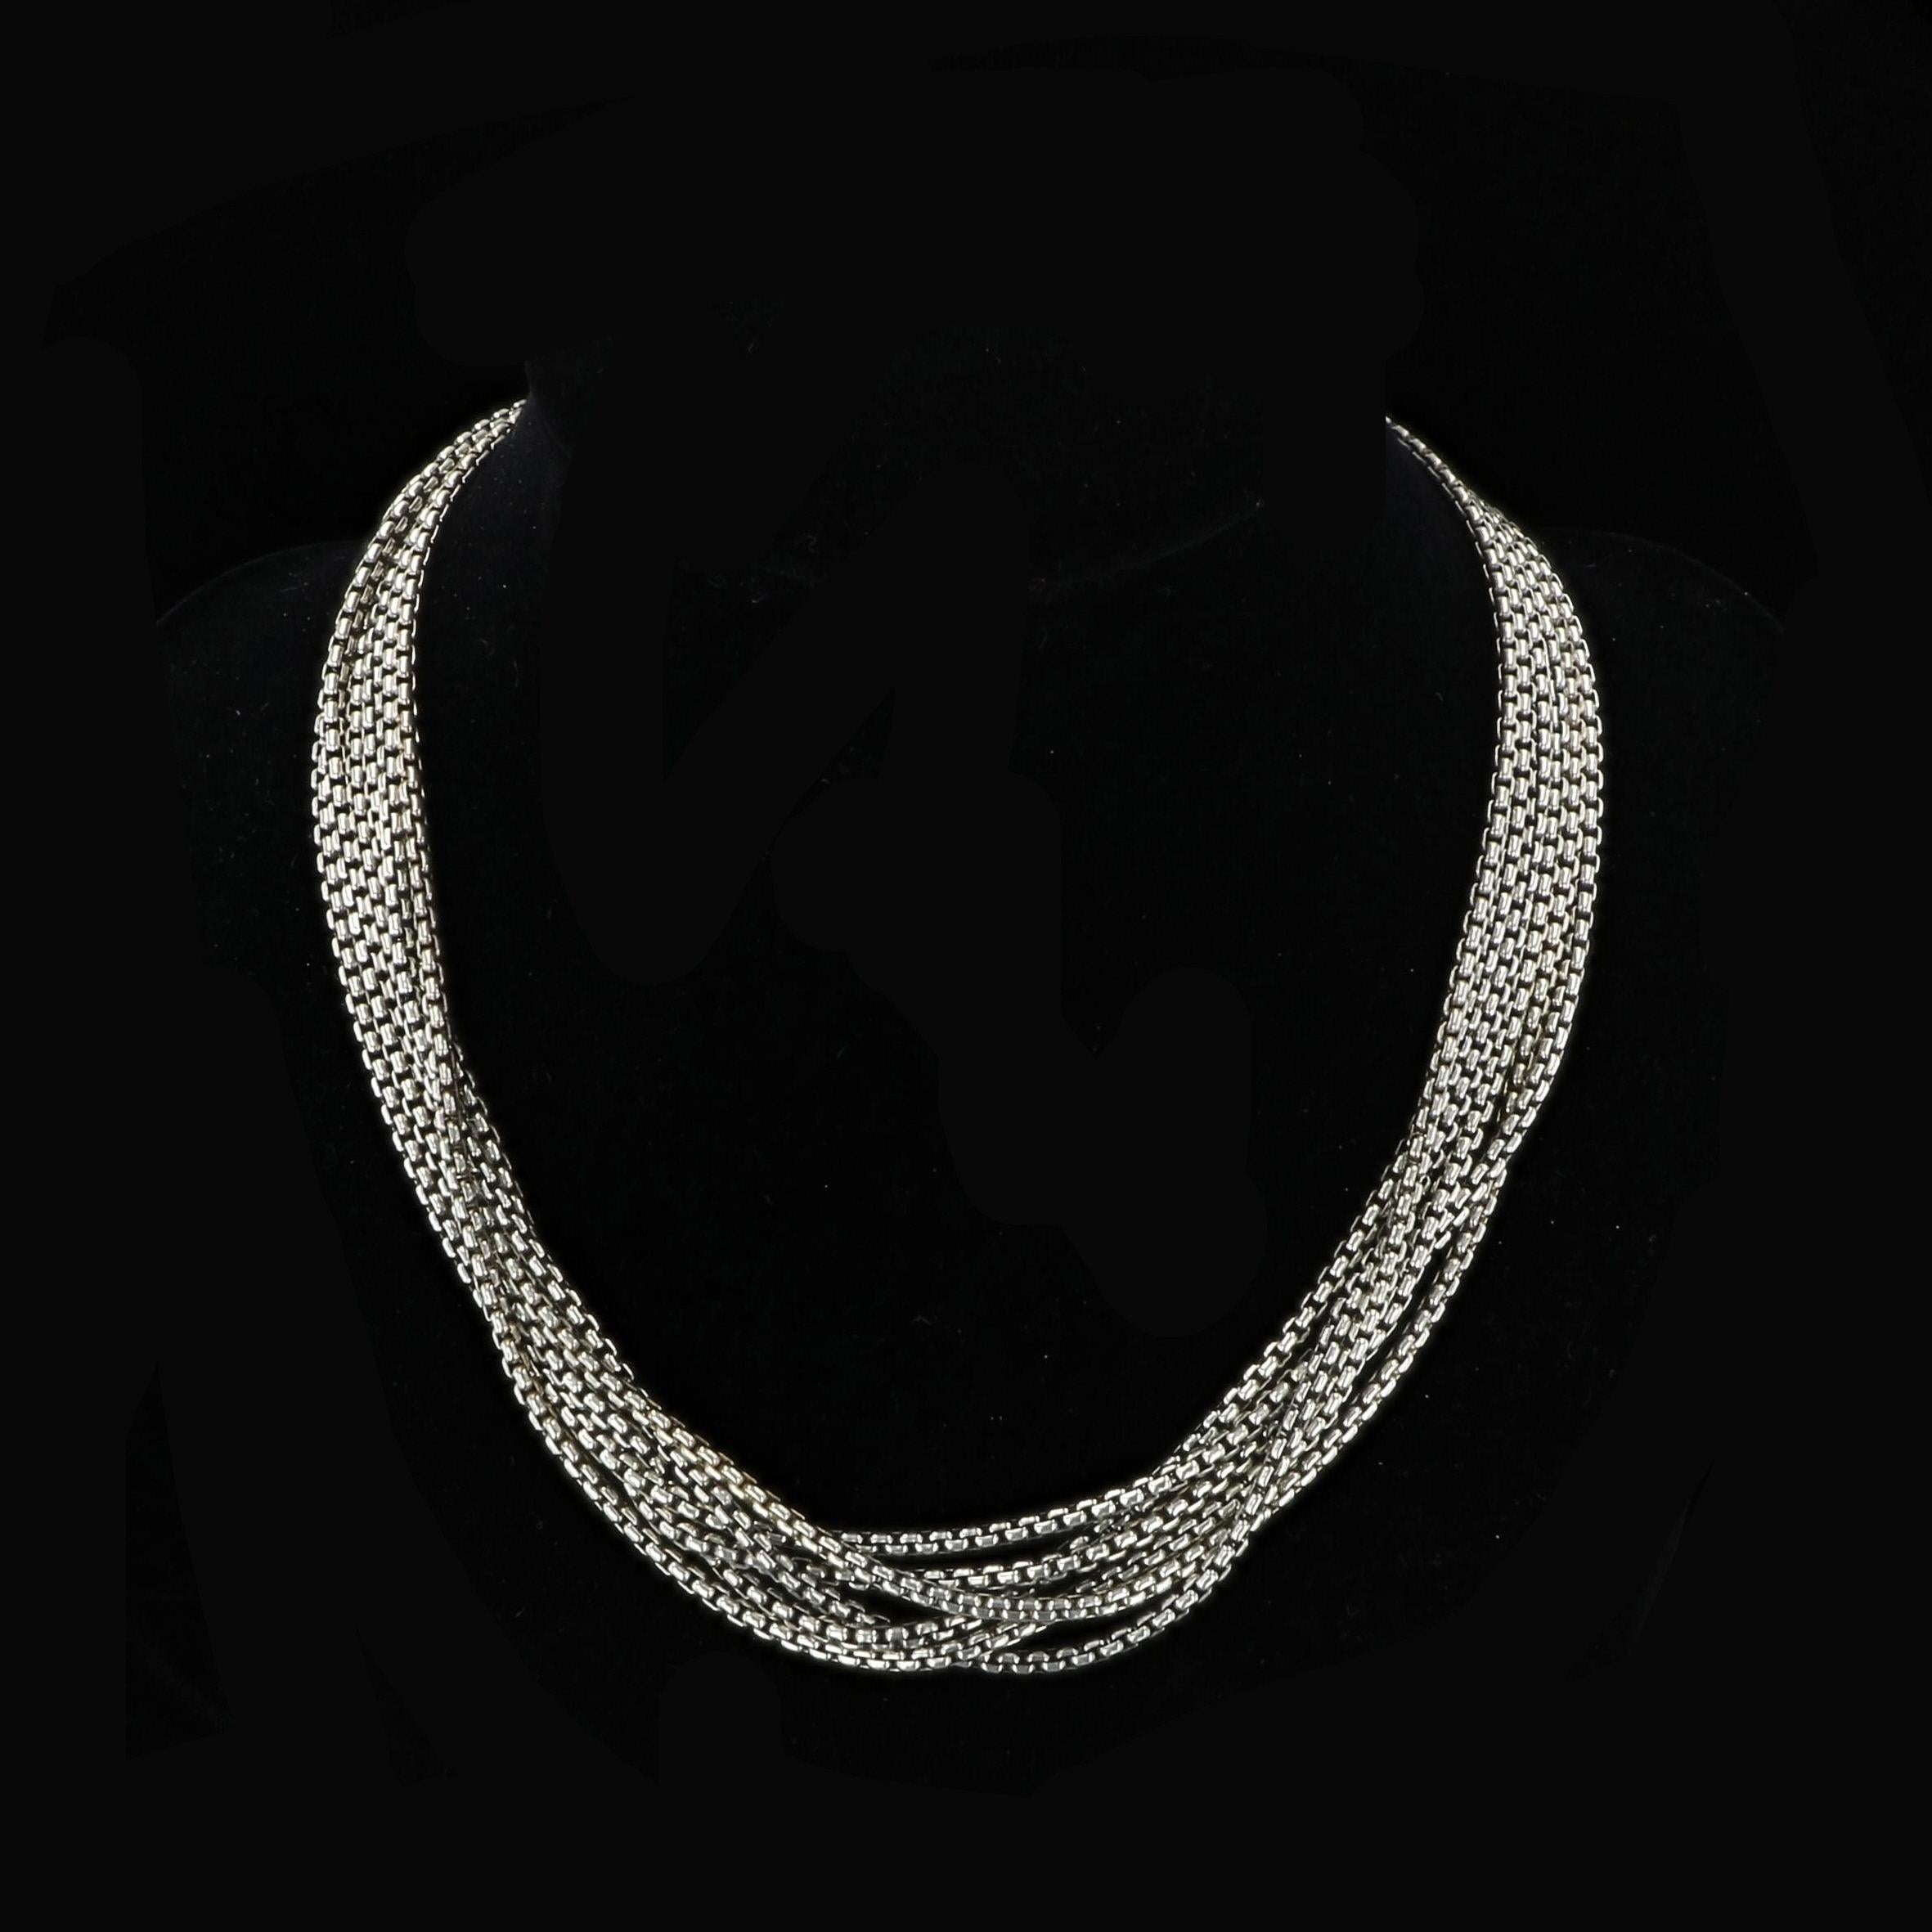 Classically chic sterling silver David Yurman necklace with 14k yellow gold accents at the clasp. The piece is comprised of a half-dozen sterling box chains that come together for a bold look. 17.5 inches in length.

Pendant shown sold separately;